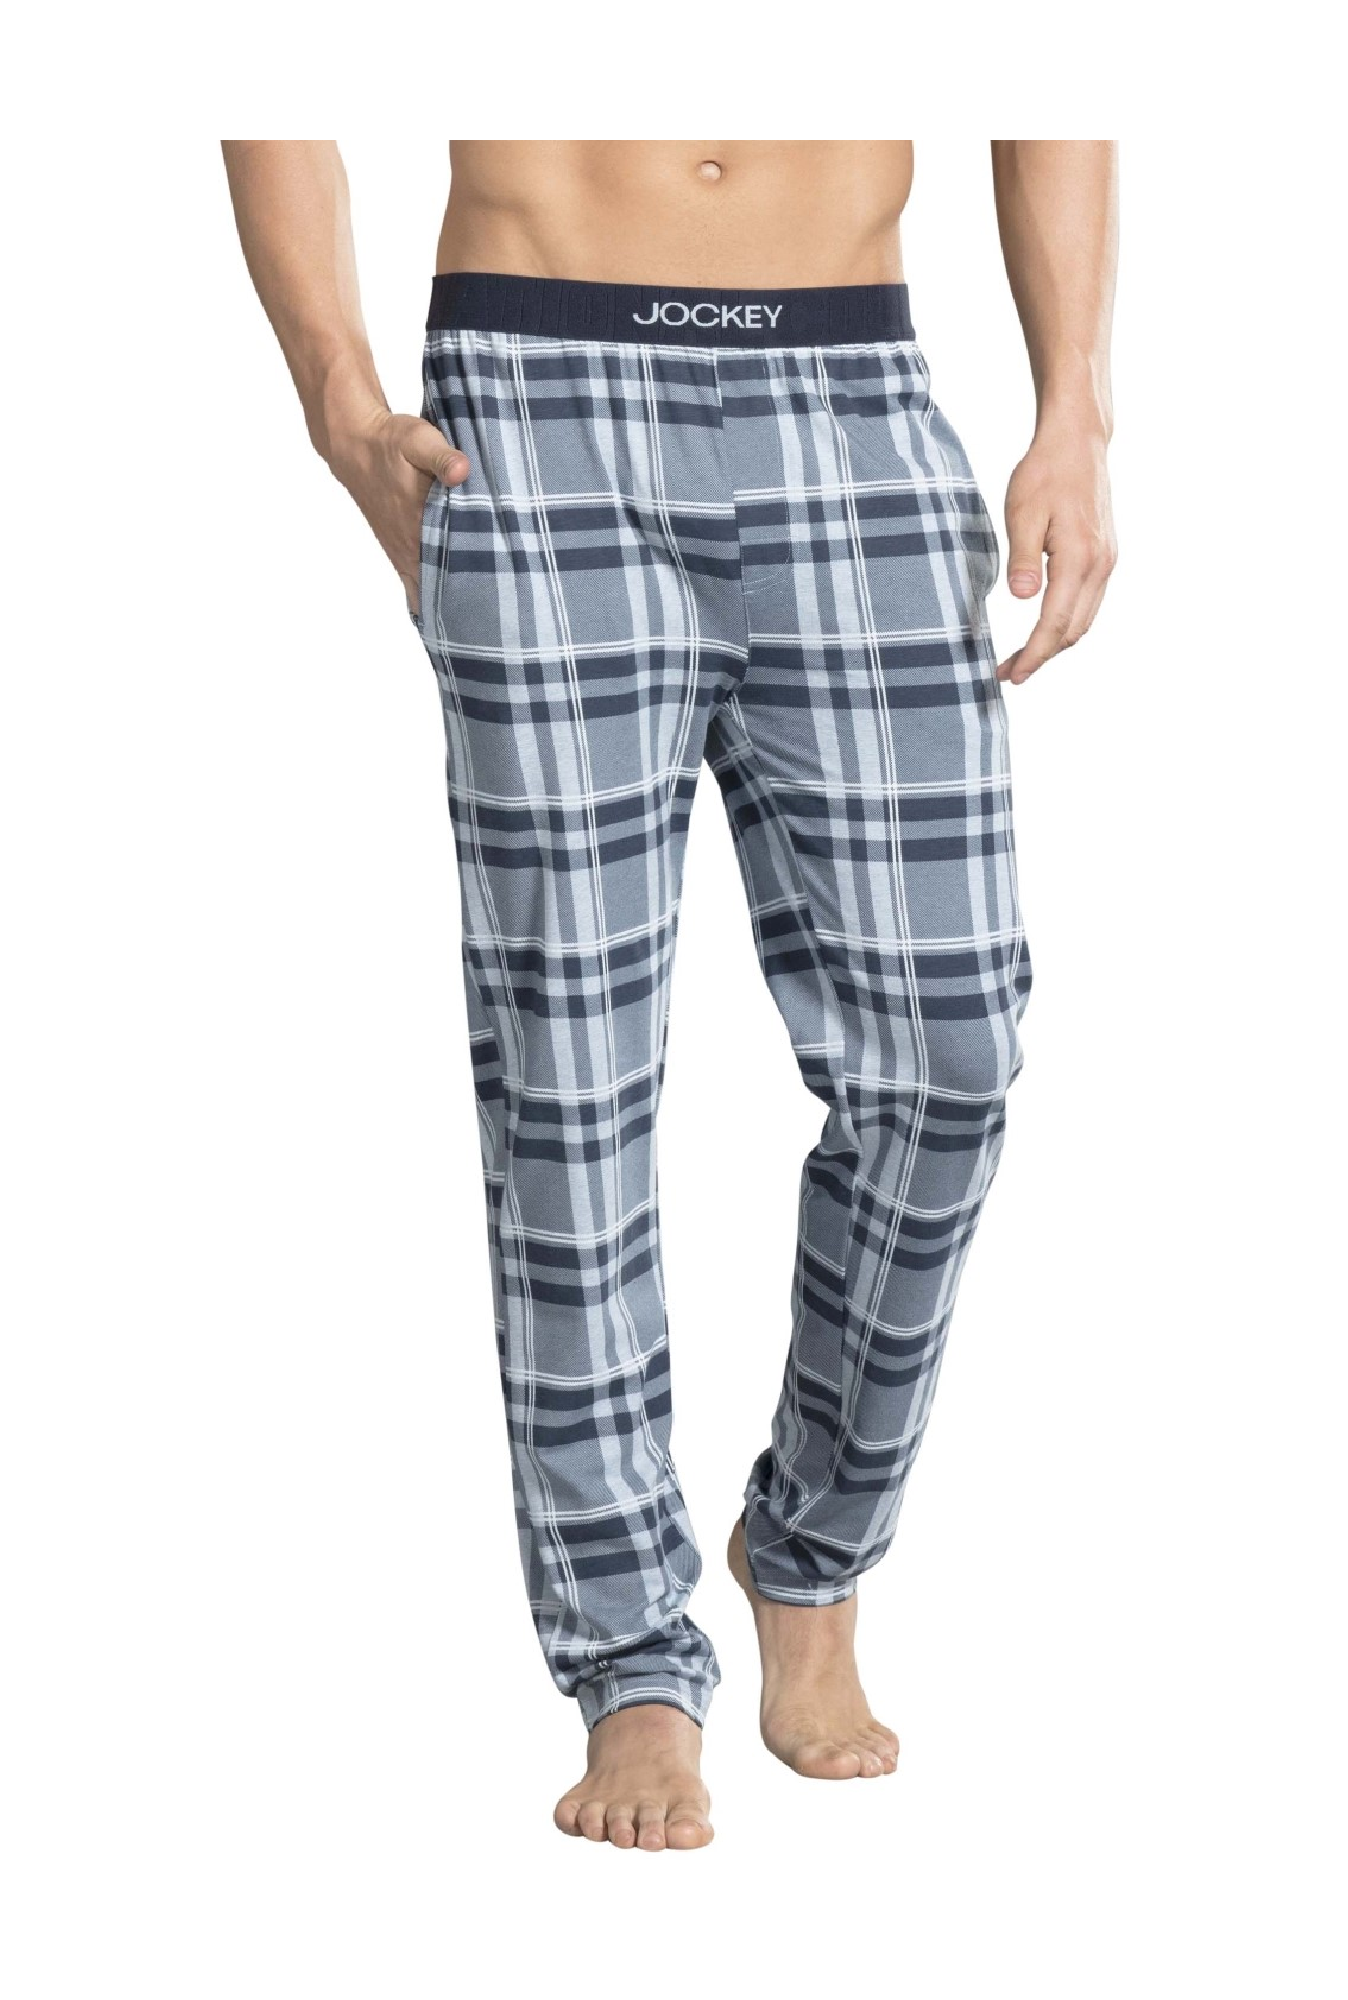 Buy Womens Super Combed Cotton Woven Fabric Relaxed Fit Checkered Pyjama  with Side Pockets  Lavender Scent Assorted Checks RX06  Jockey India